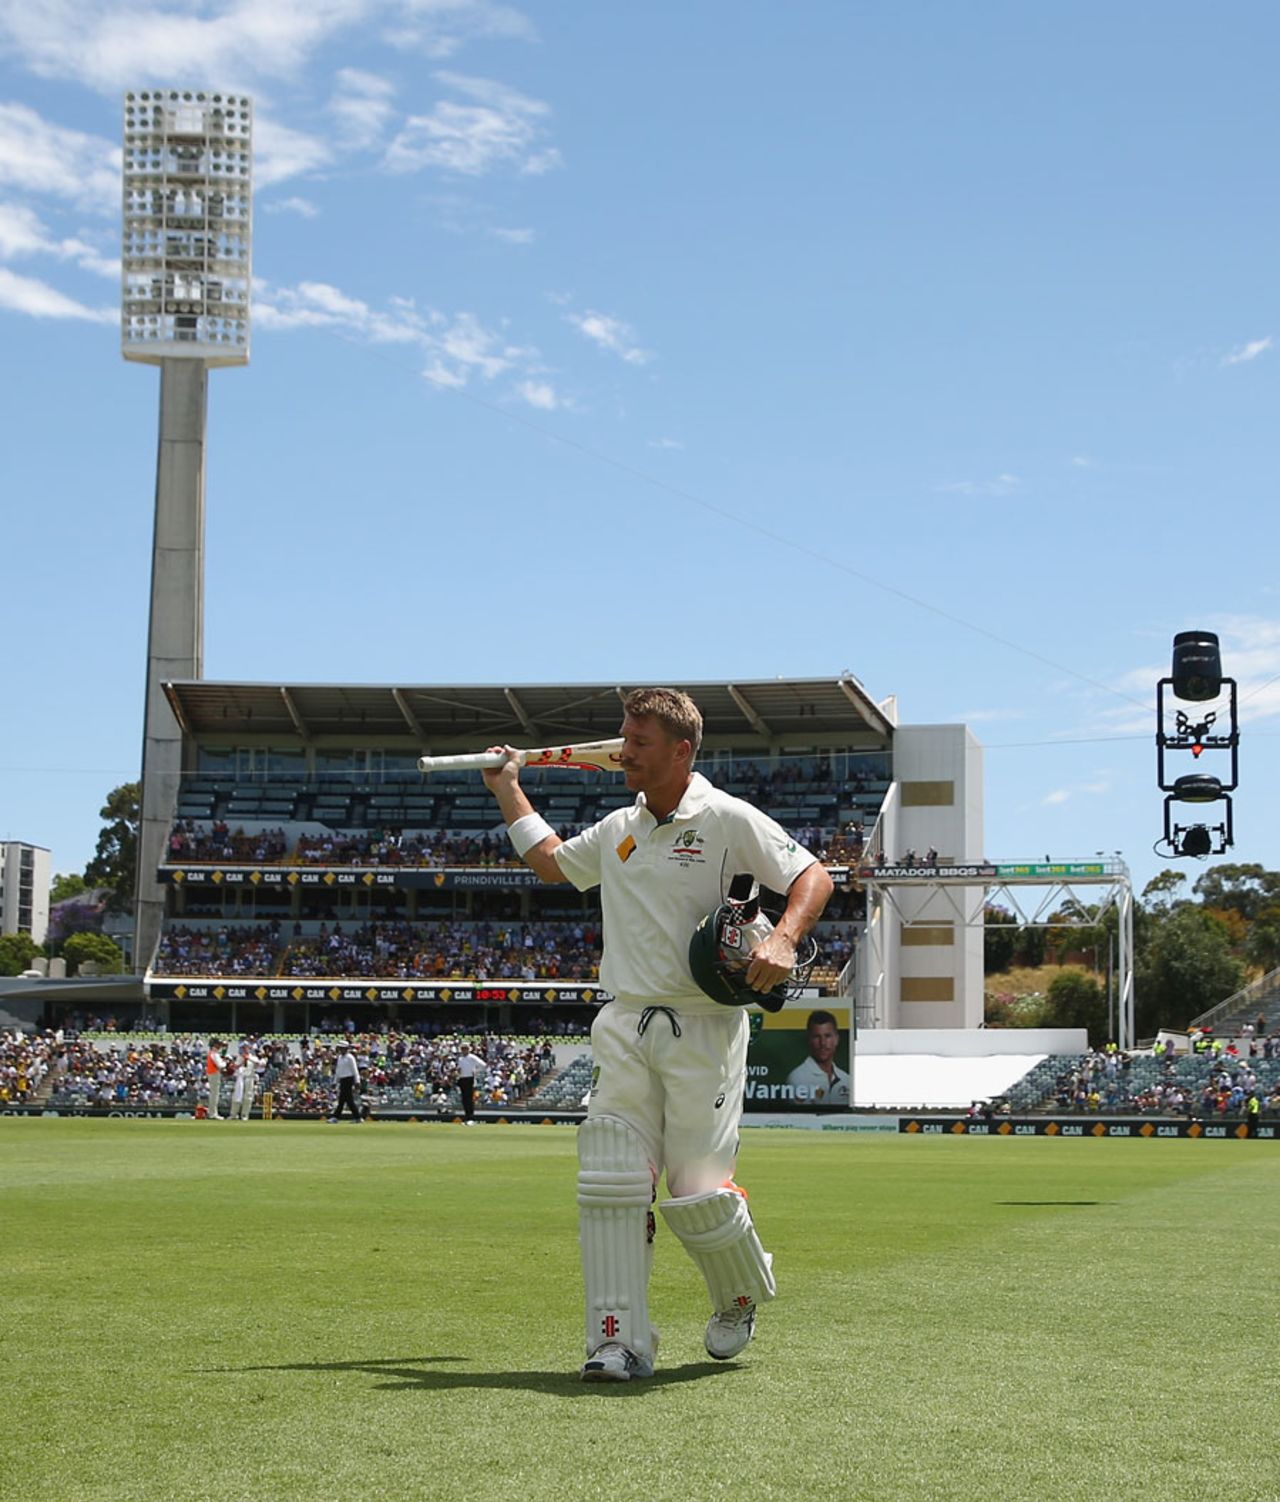 David Warner acknowledges the crowd after his epic 253, Australia v New Zealand, 2nd Test, Perth, 2nd day, November 14, 2015